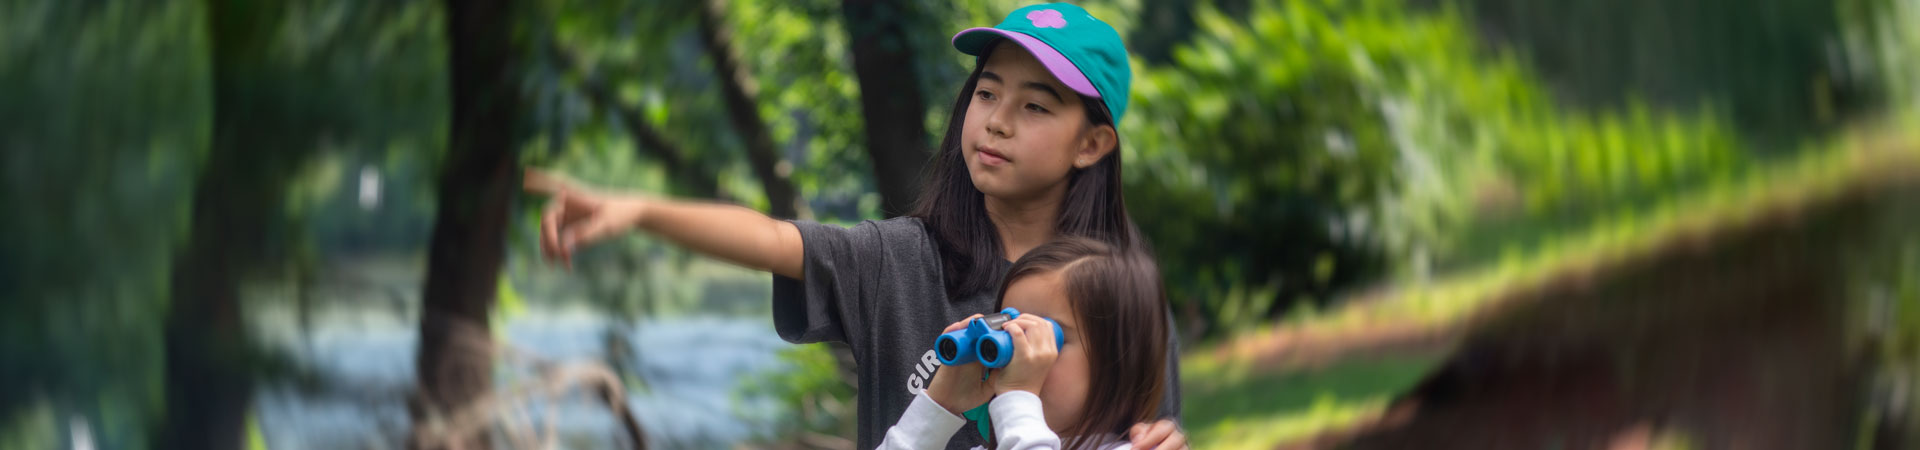  Two Girl Scouts stand outside in front of green trees and a body of water. The older Girl Scout wears a hat and points in the distance, while the younger Girl Scout looks through binoculars. 